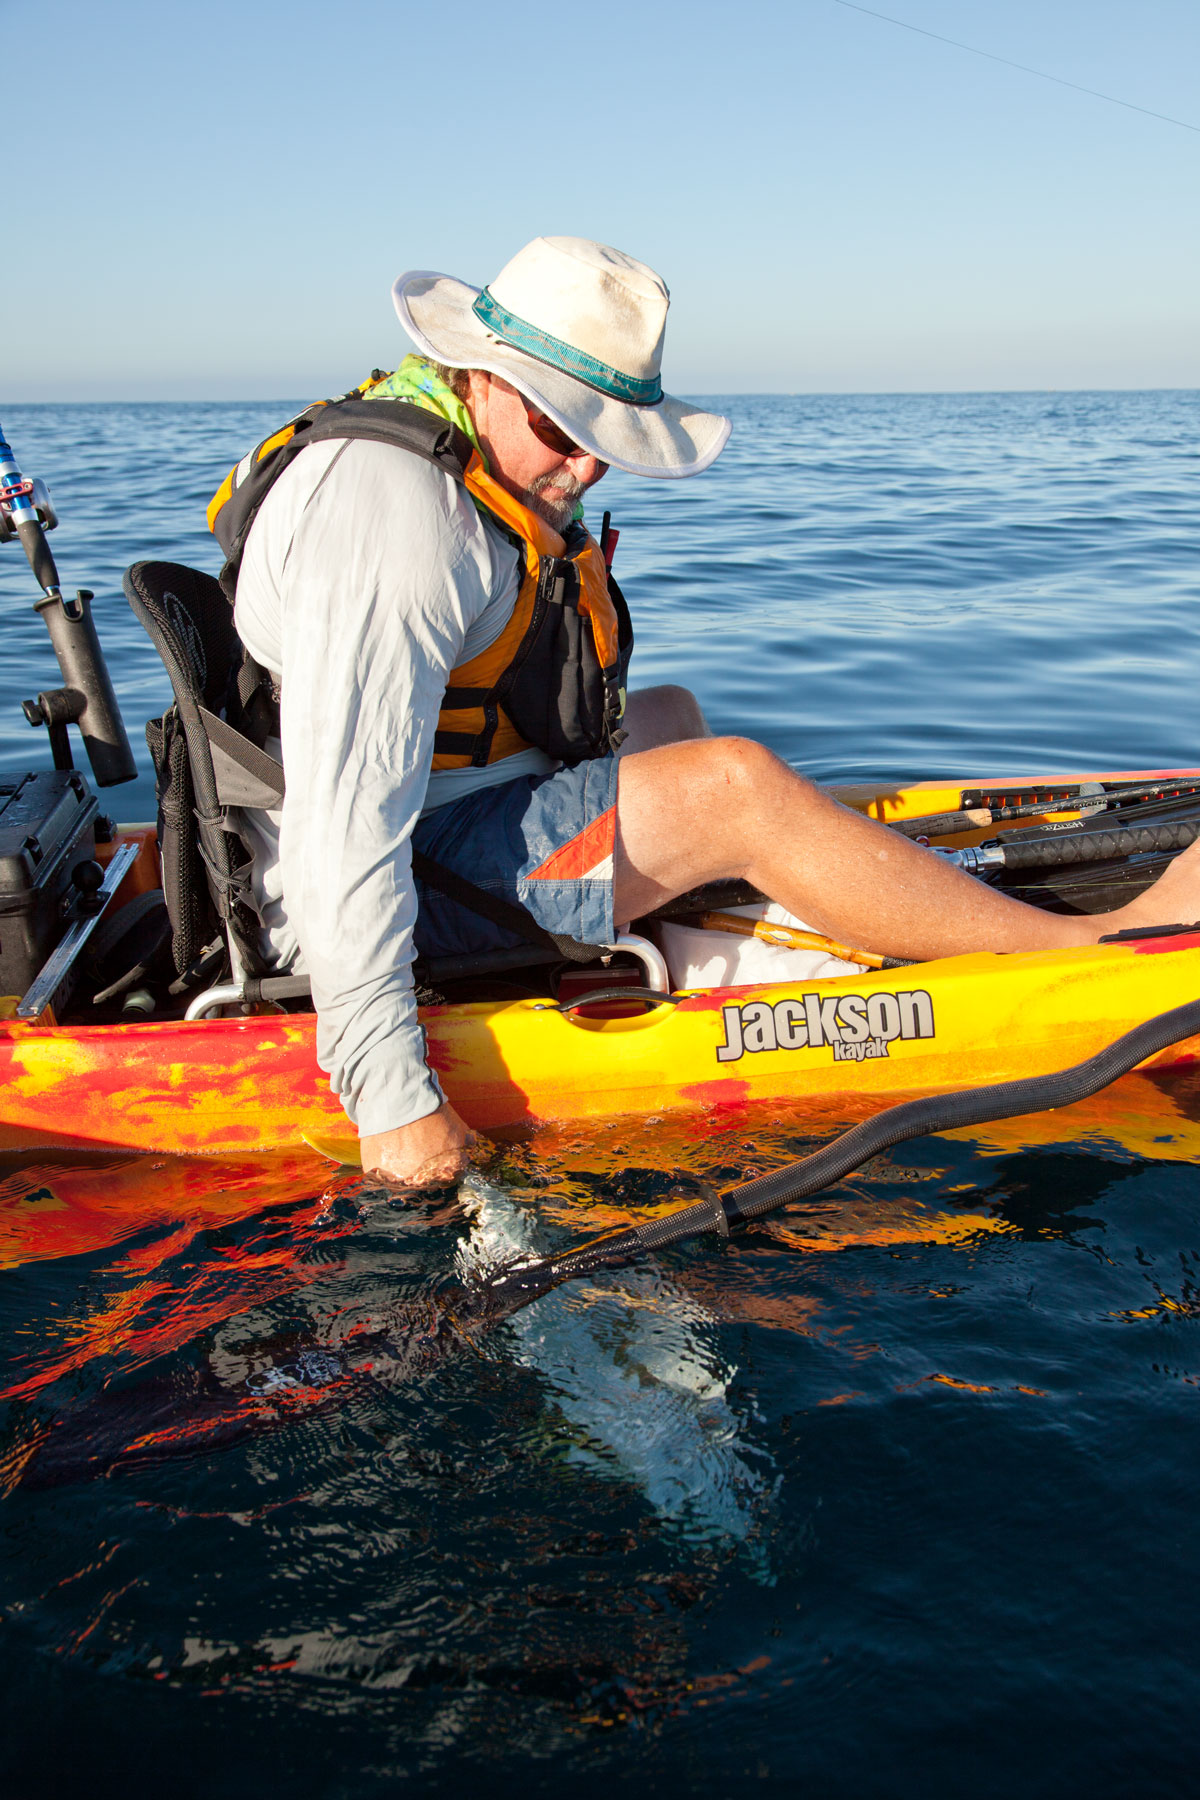 With your kayak set up for live bait, you will get more big fish.